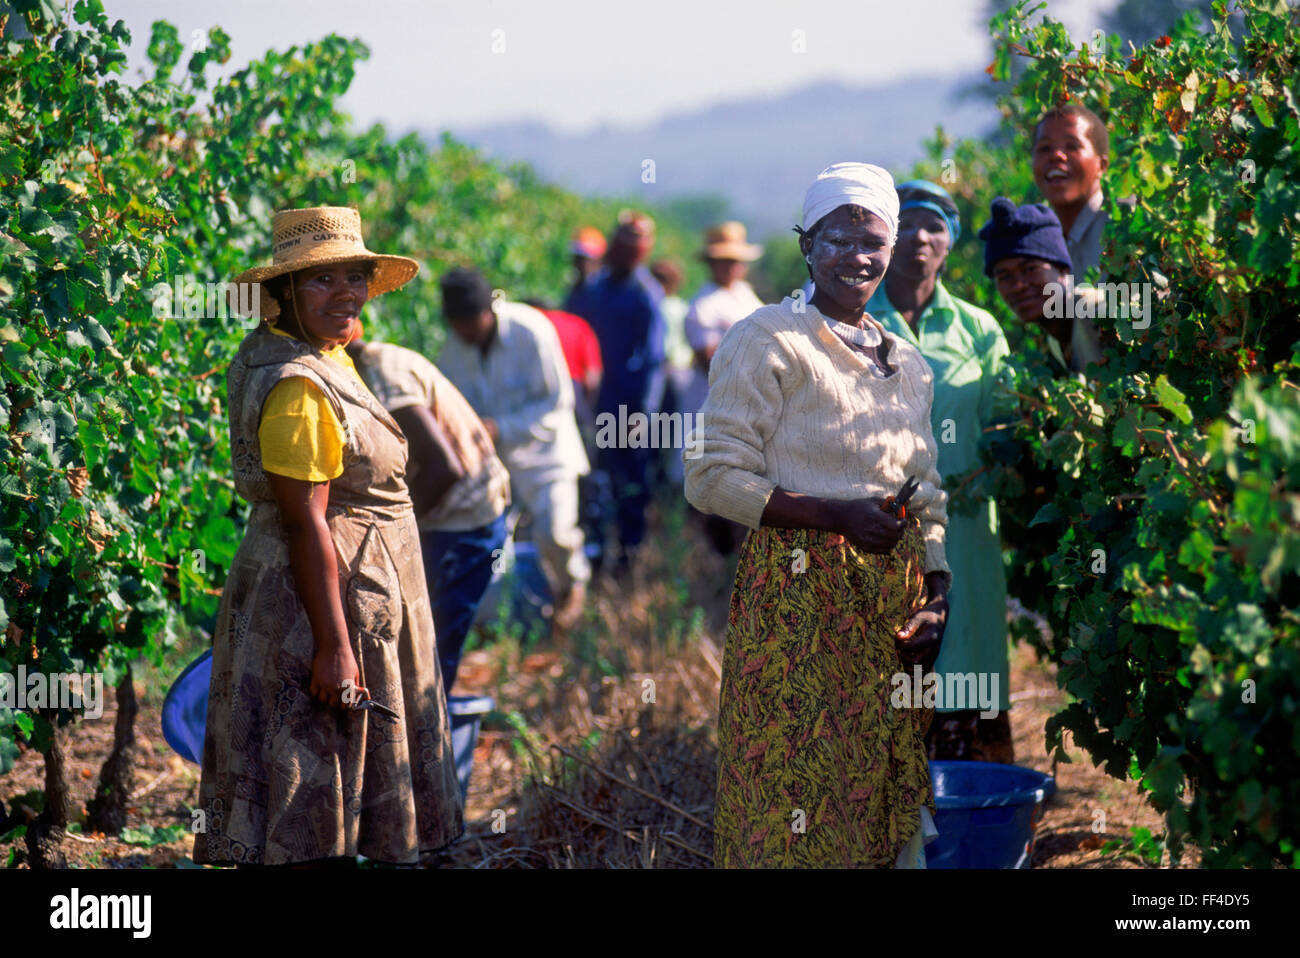 Grape harvesting in the vineyards at Stellenbosch, a town on the Western Cape province of South Africa Stock Photo